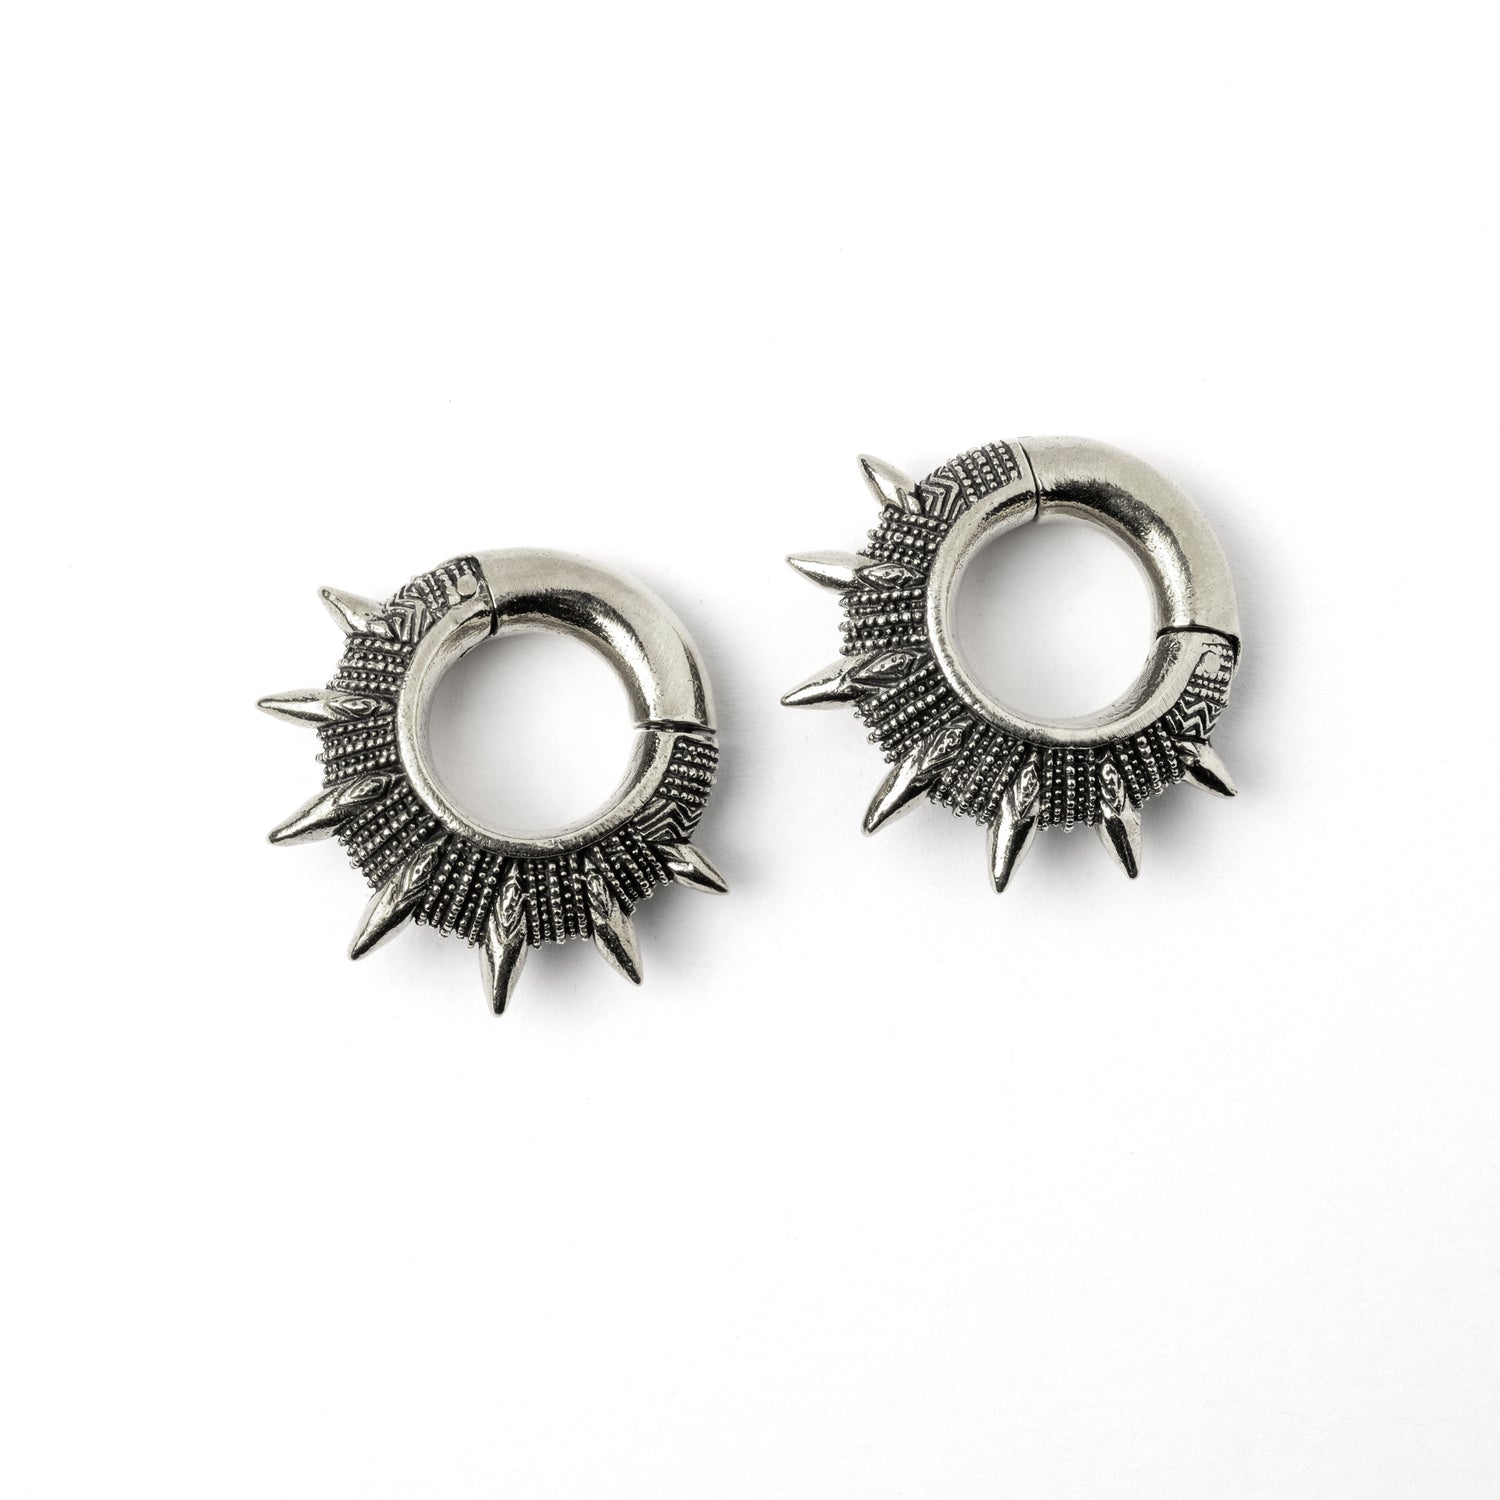 pair of silver colour spiky ear weights hoops left side view